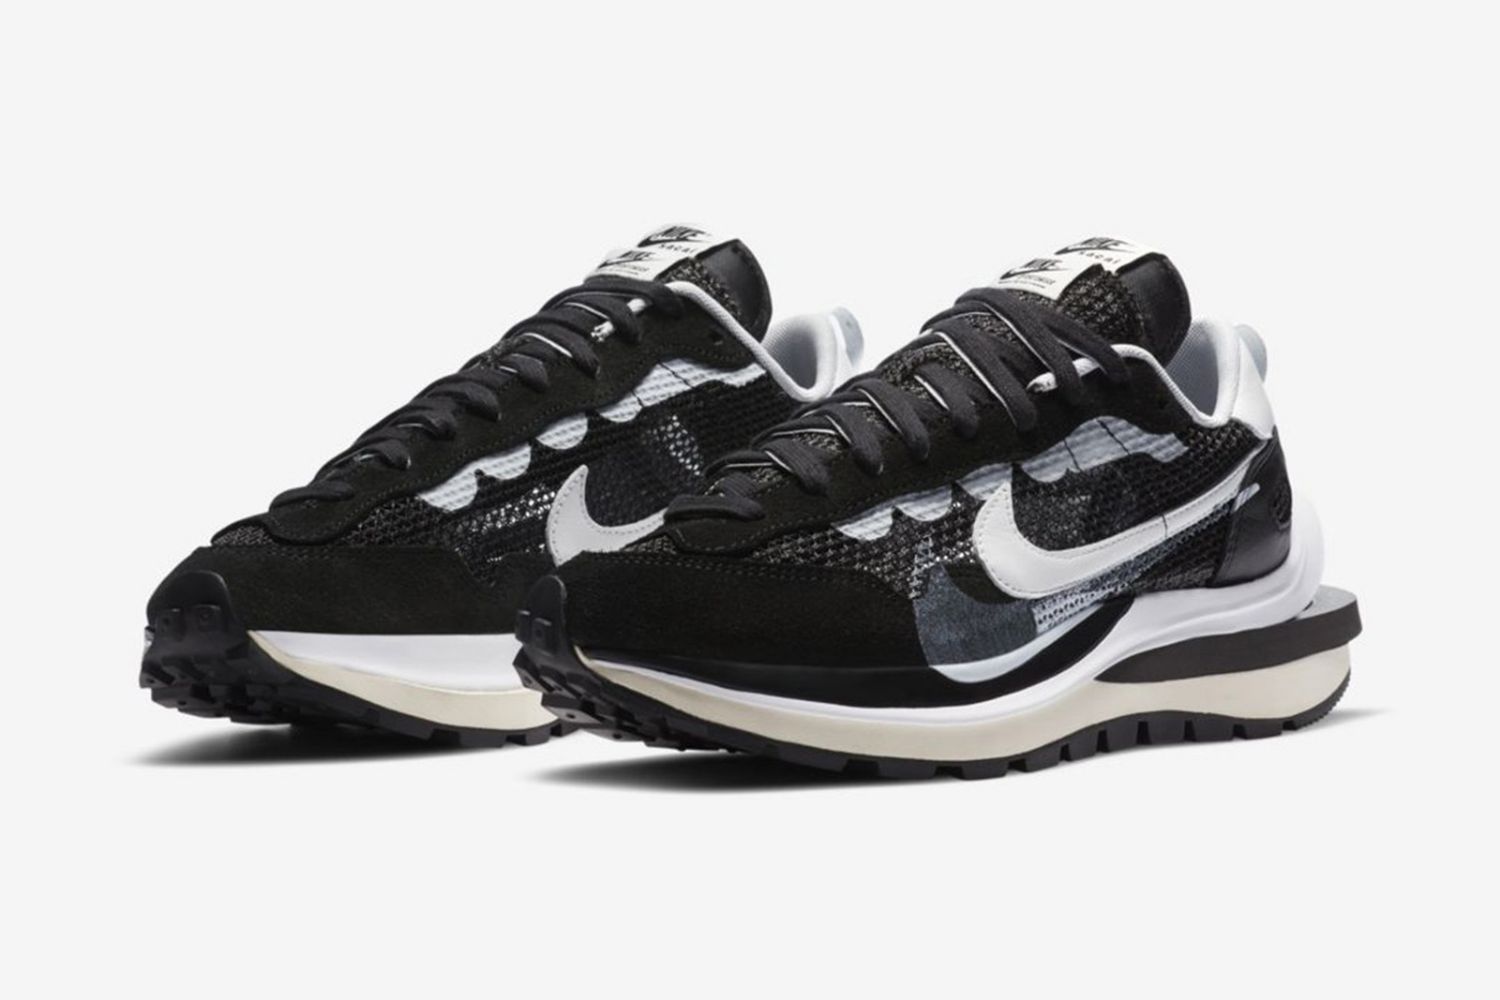 Images of Nike’s Vaporwaffle Have Been Released – PAUSE Online | Men's ...